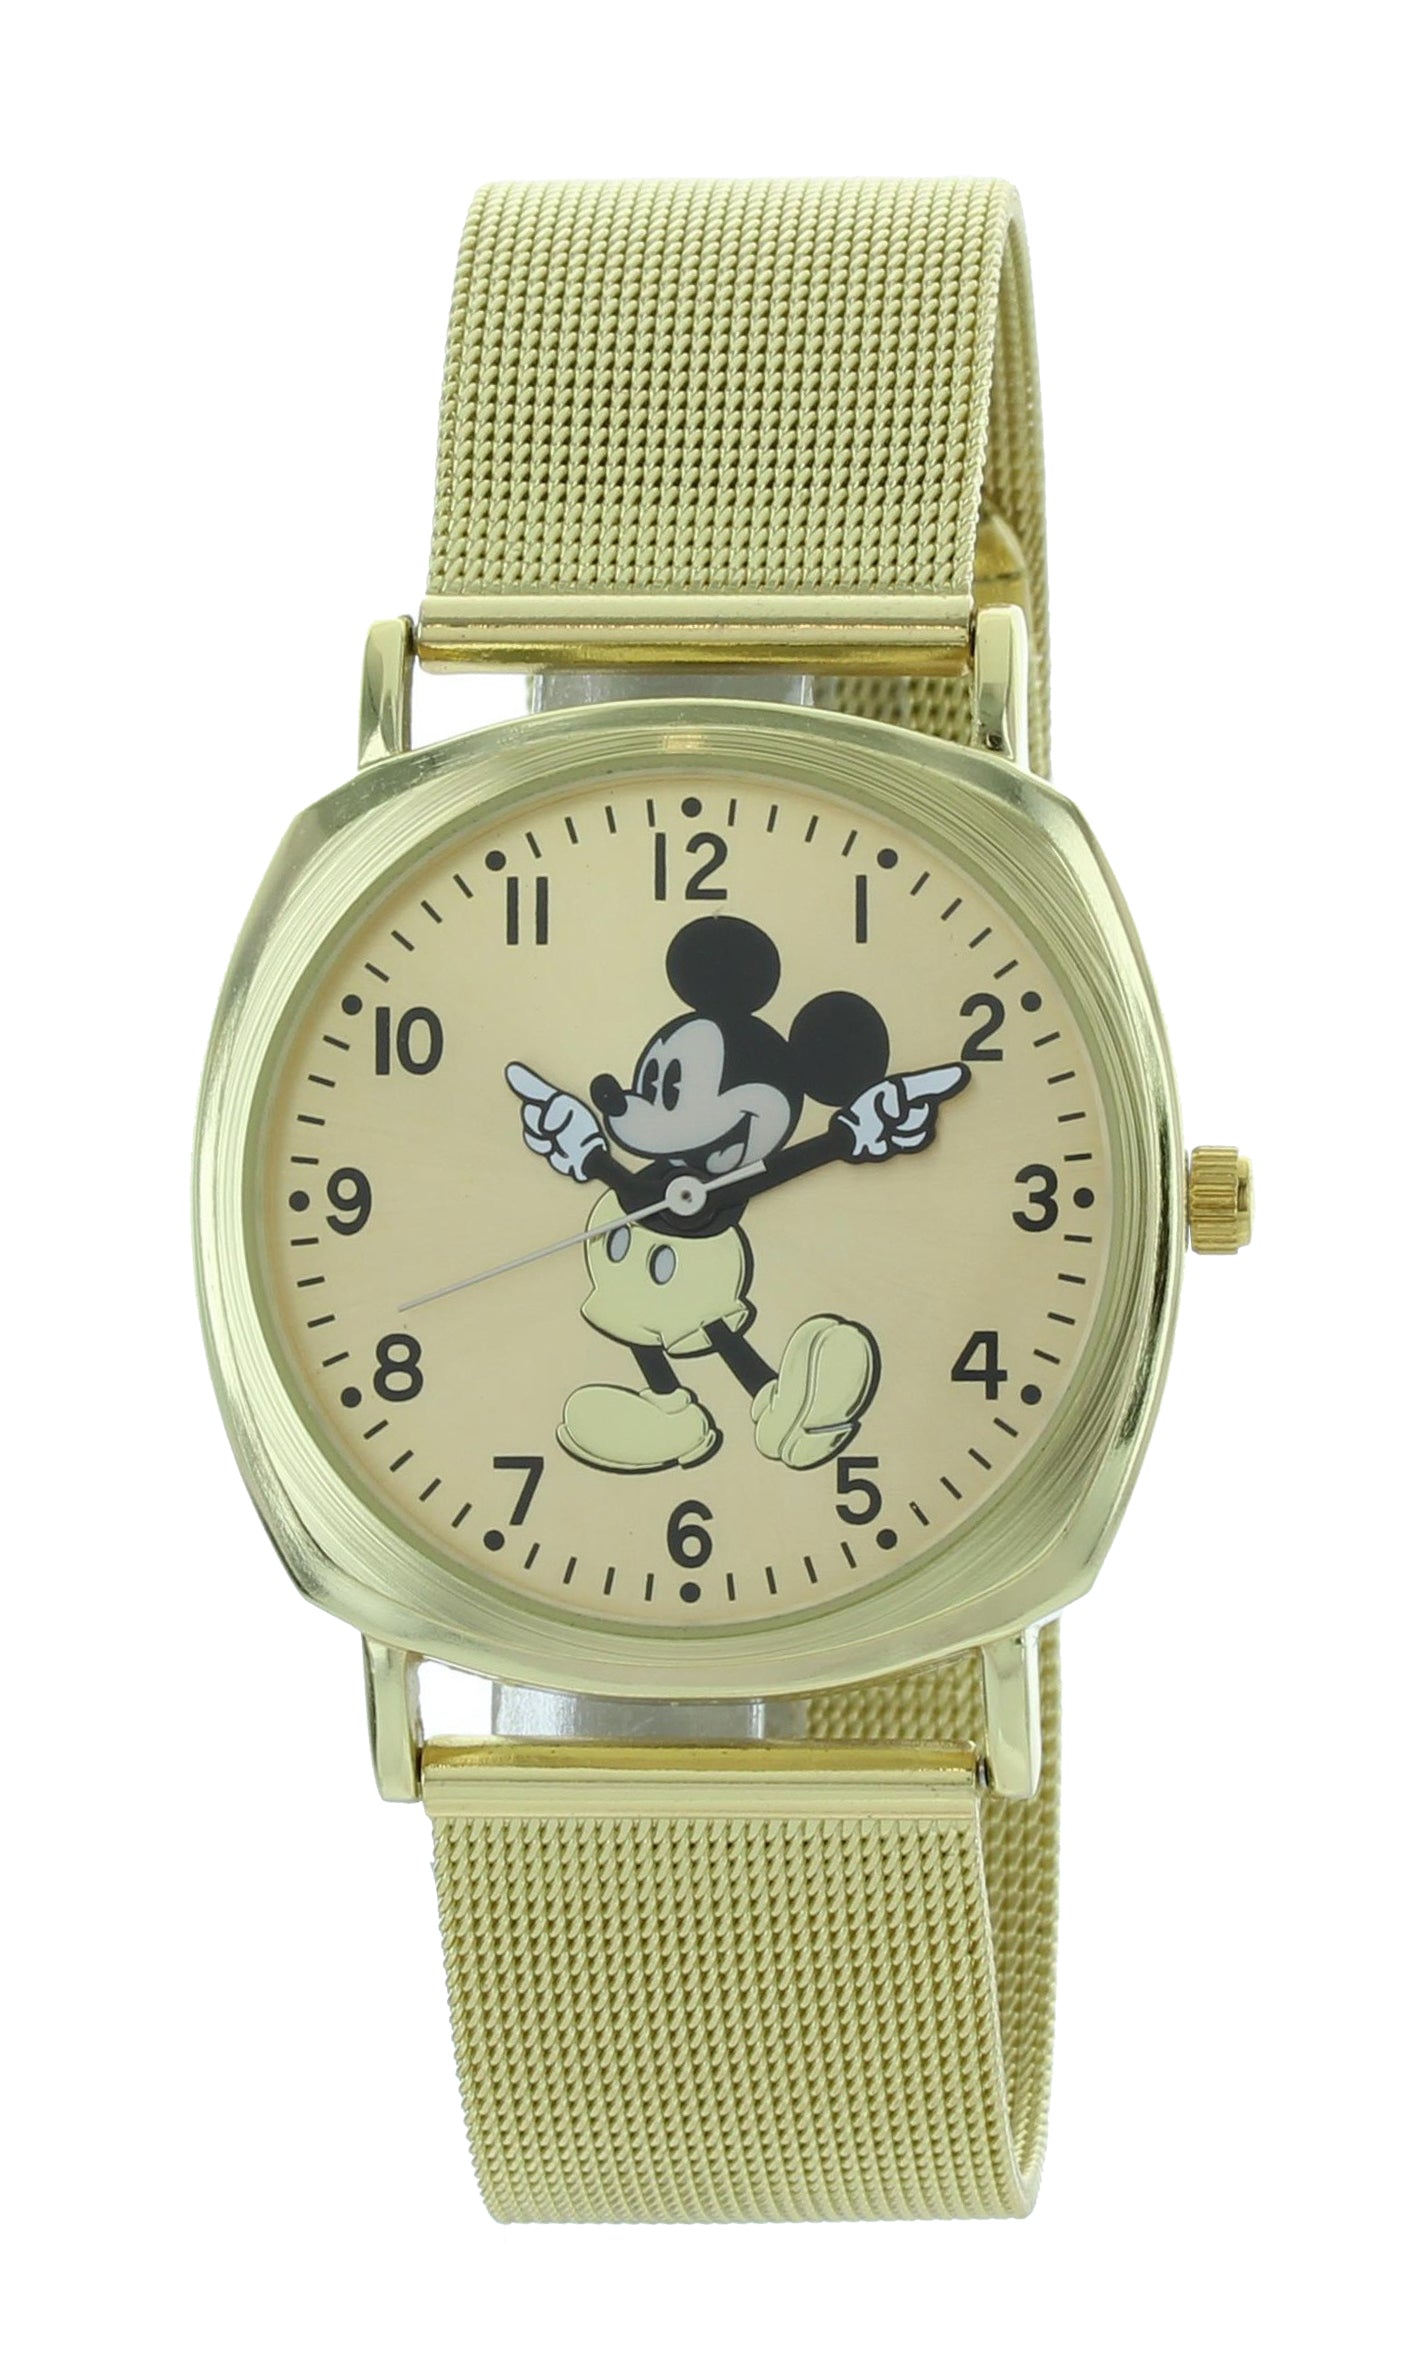 Model: Cute Disney Unisex Mickey Mouse Analog Watch with Gold Tone Mesh Band